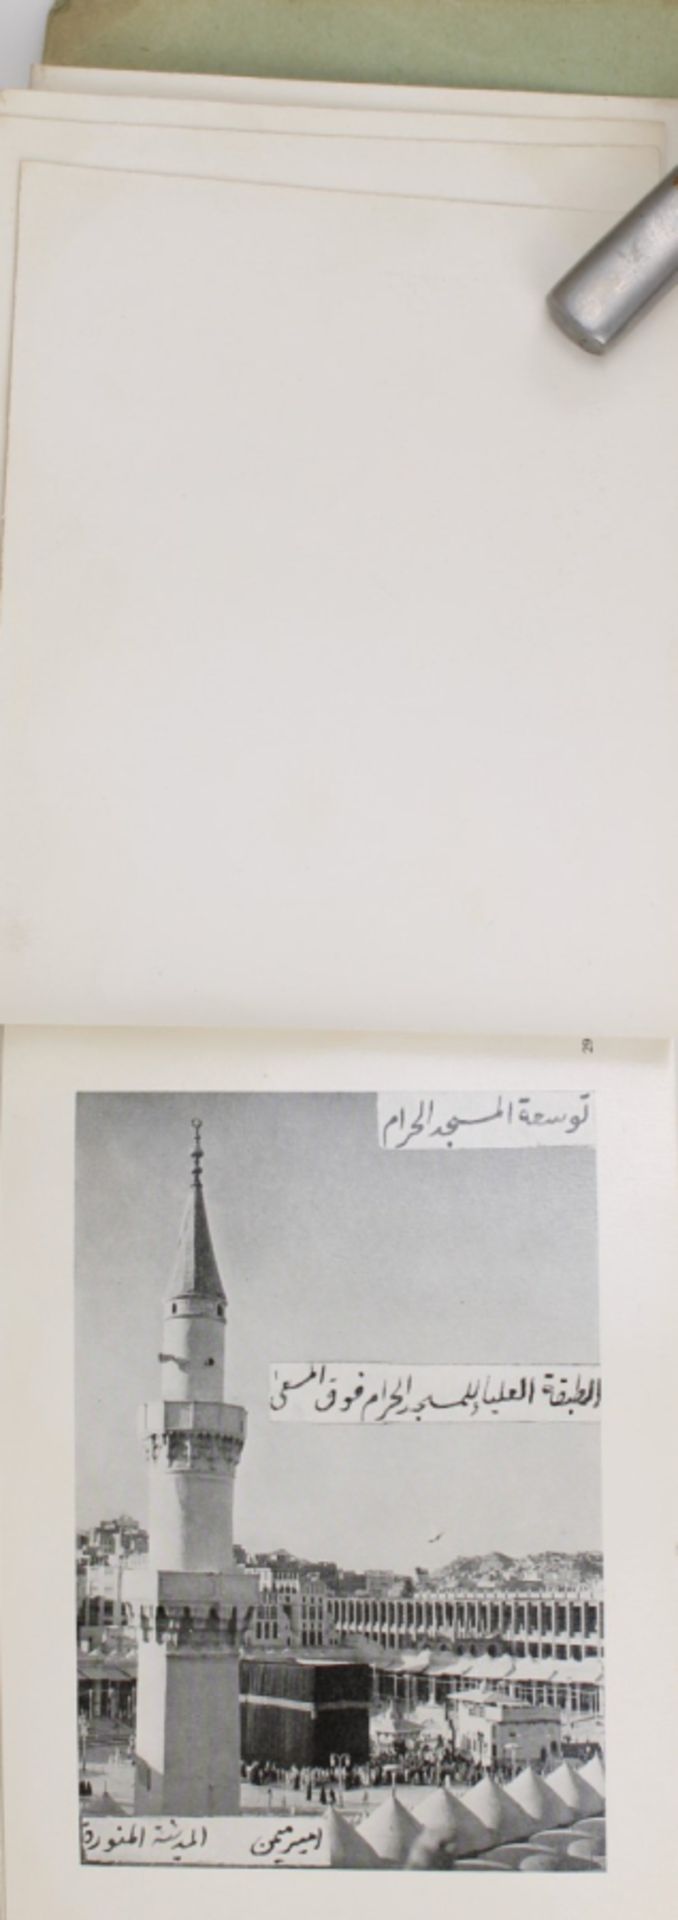 1930 Album with photographs of Mecca - Image 9 of 24